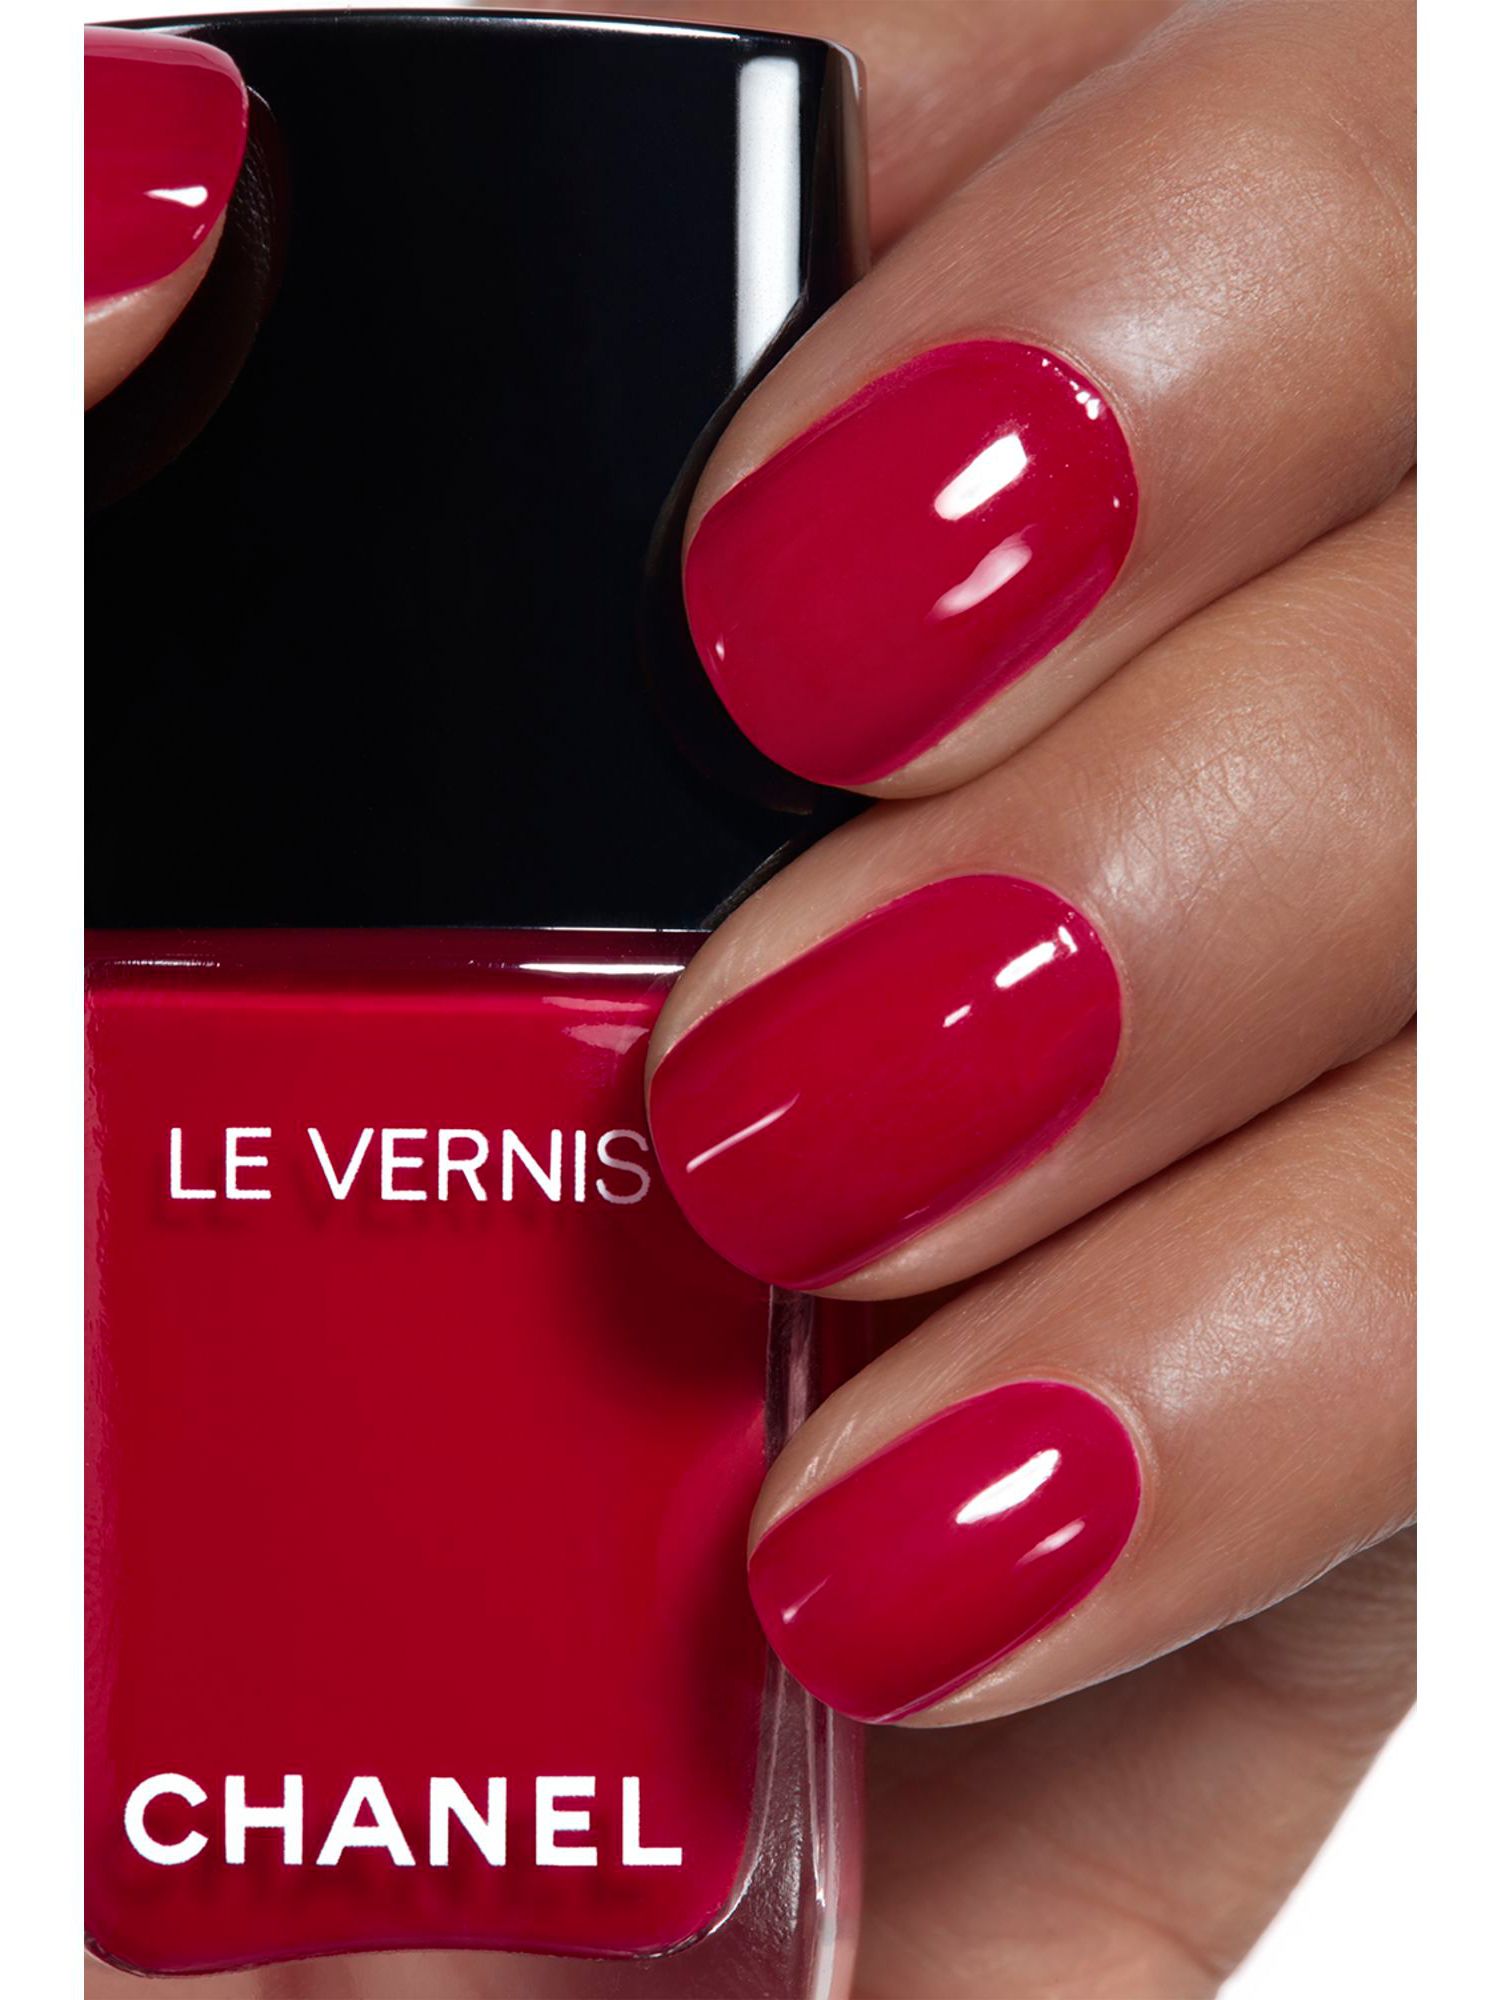 CHANEL Le Vernis Nail Pirate 151 Lewis at Colour, Partners & John